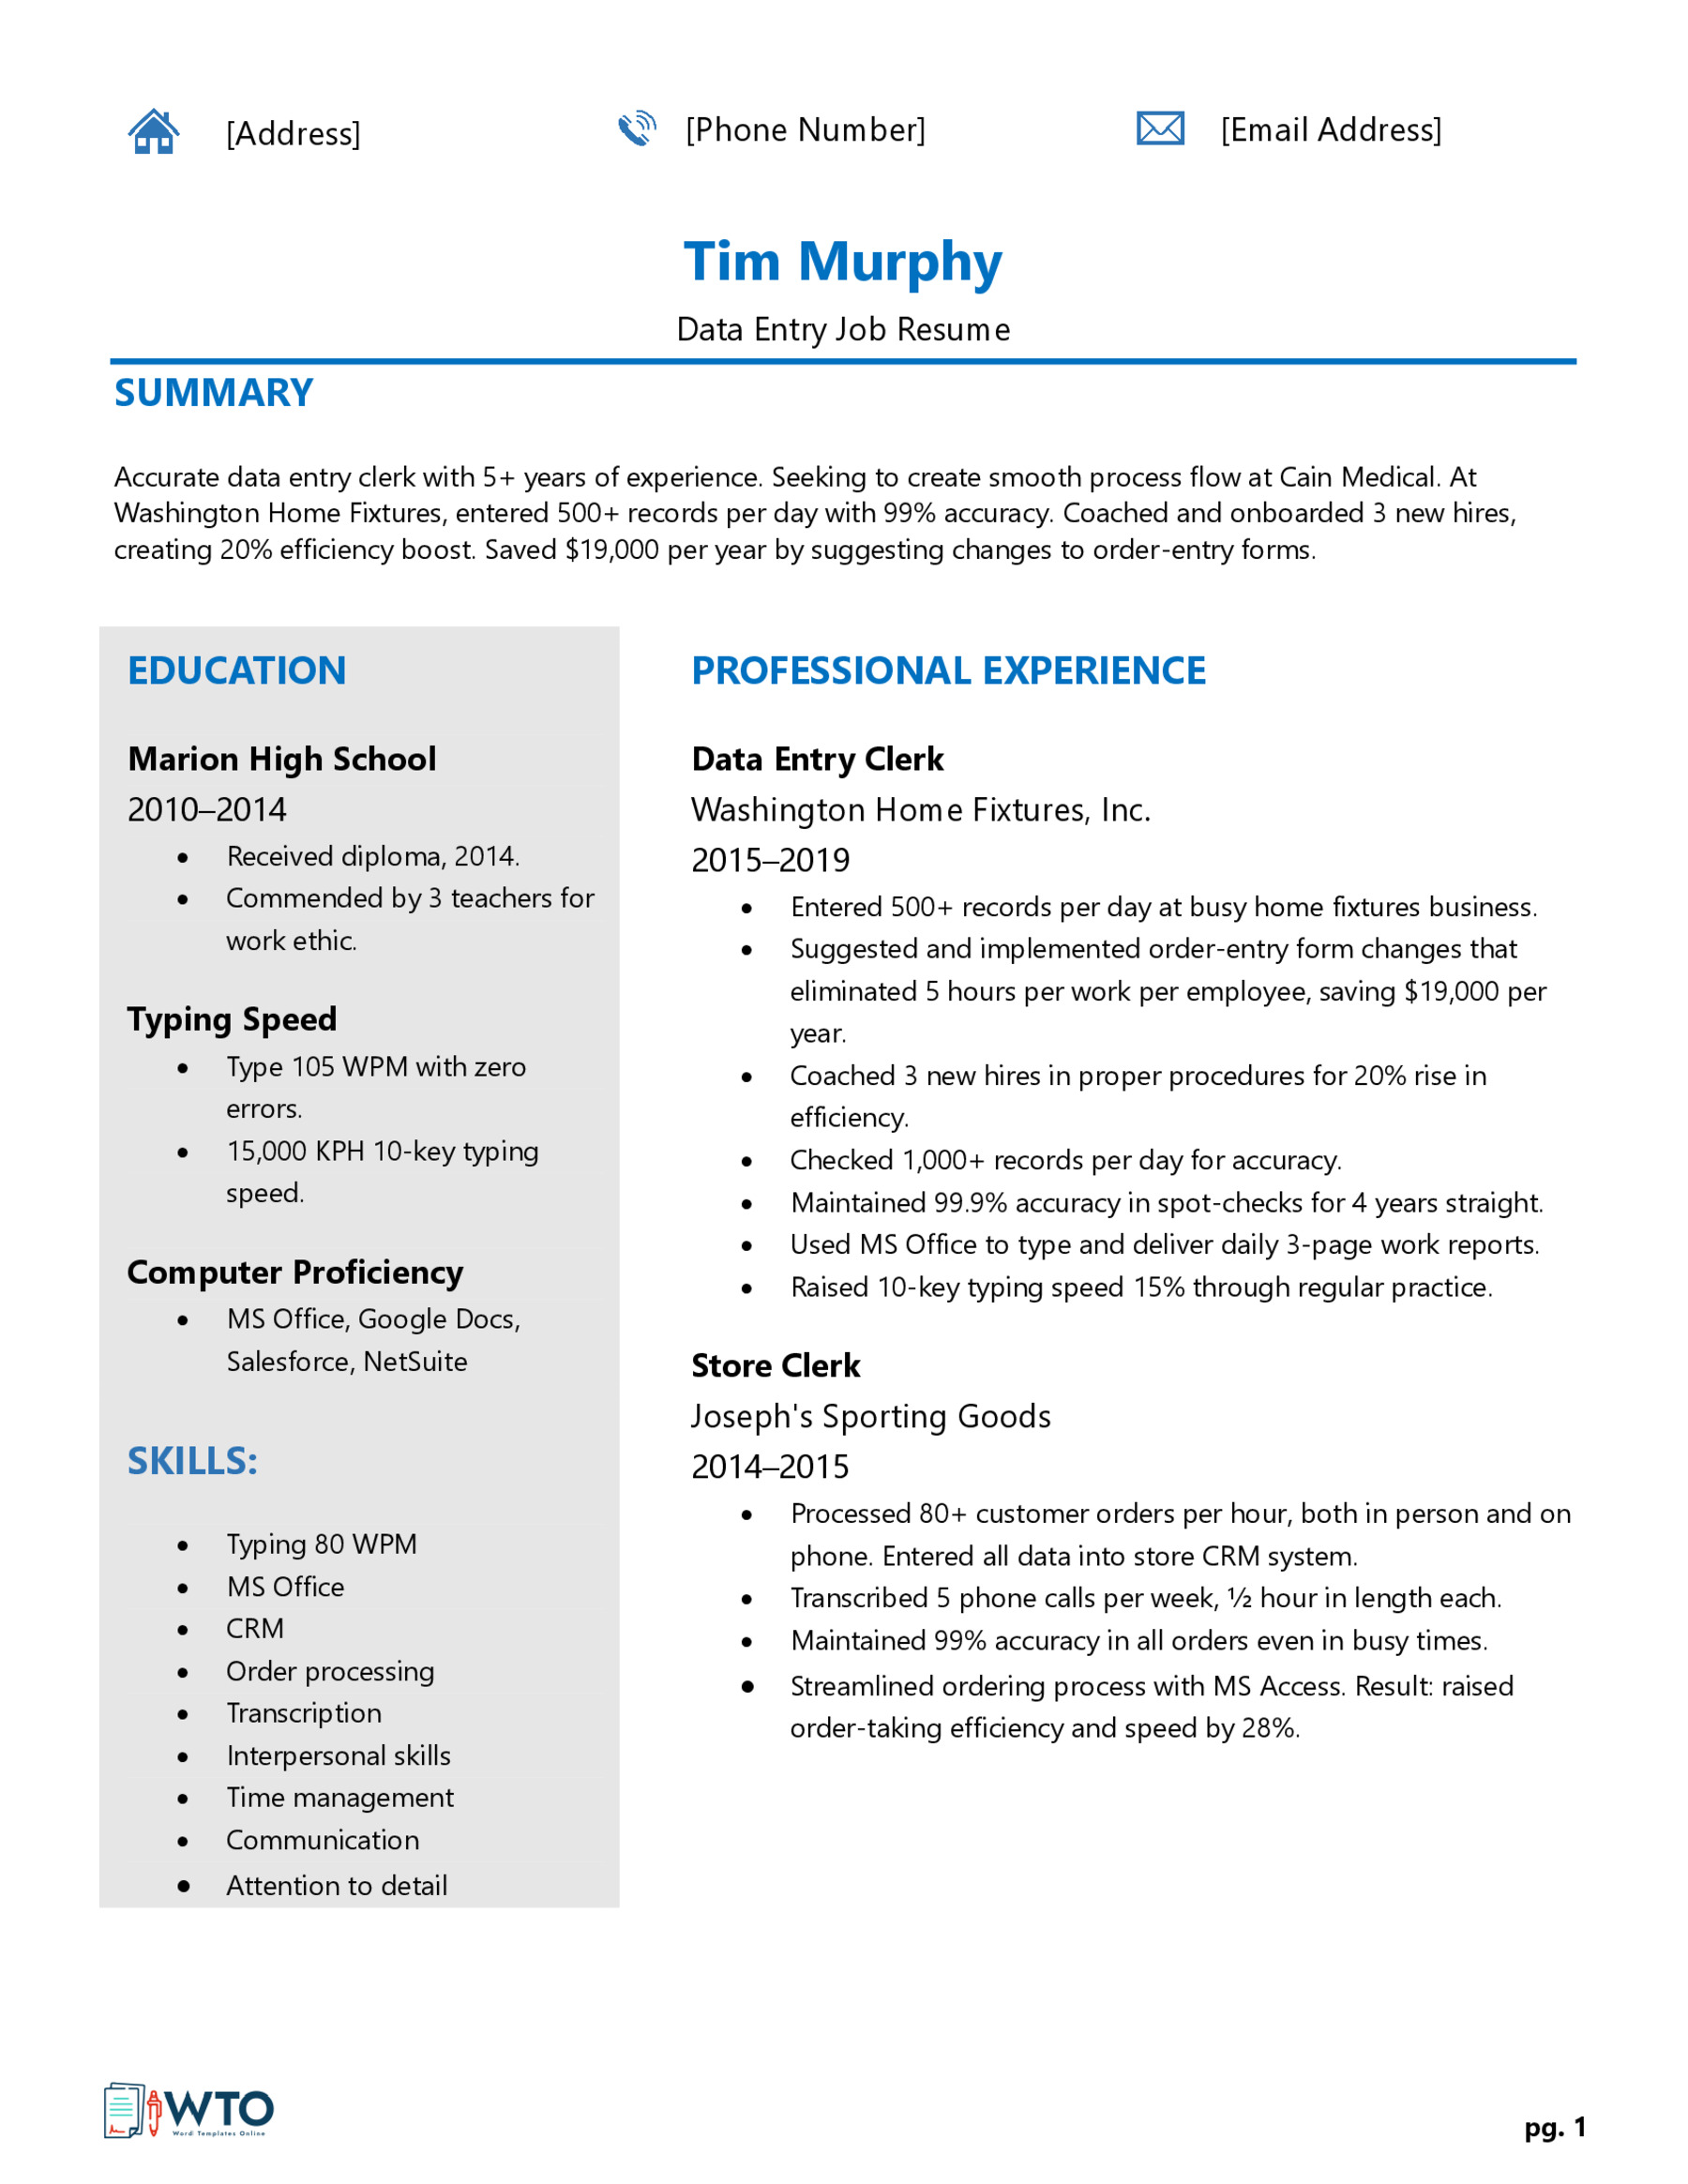 Data Entry Job Resume - Creative and Eye-catching Template